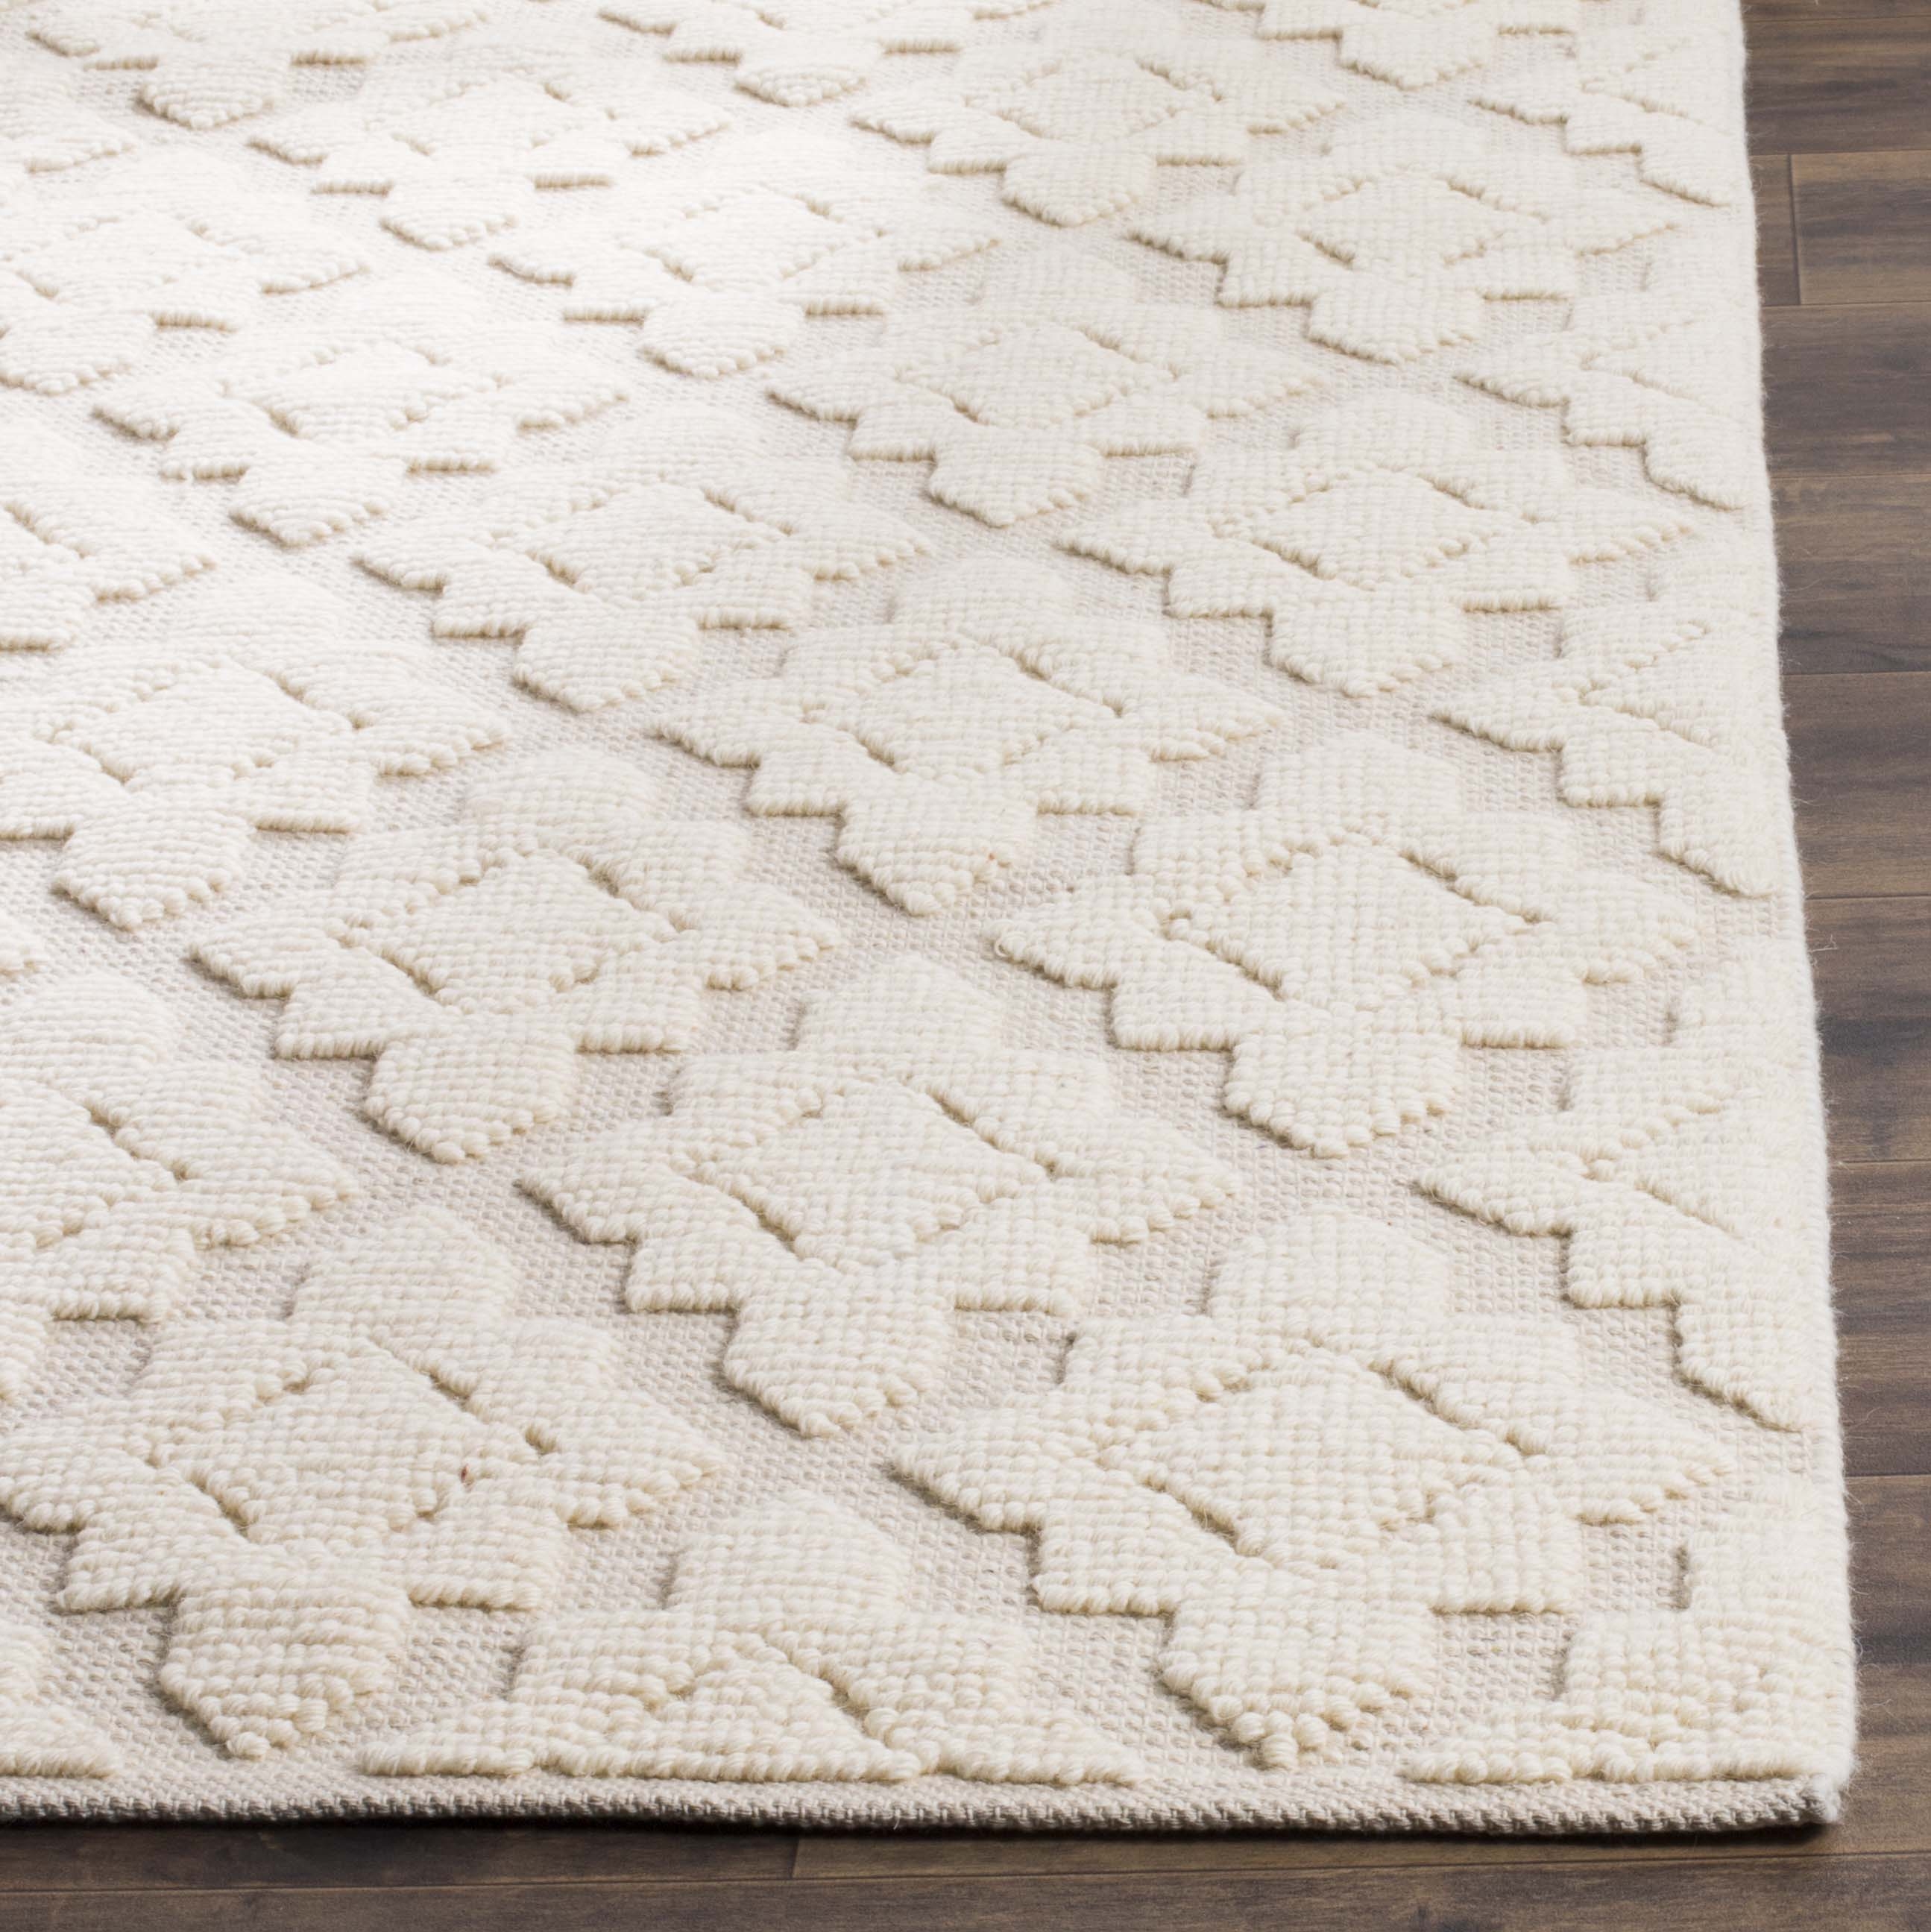 Arlo Home Hand Woven Area Rug, VRM103A, Ivory,  8' X 10' - Image 2